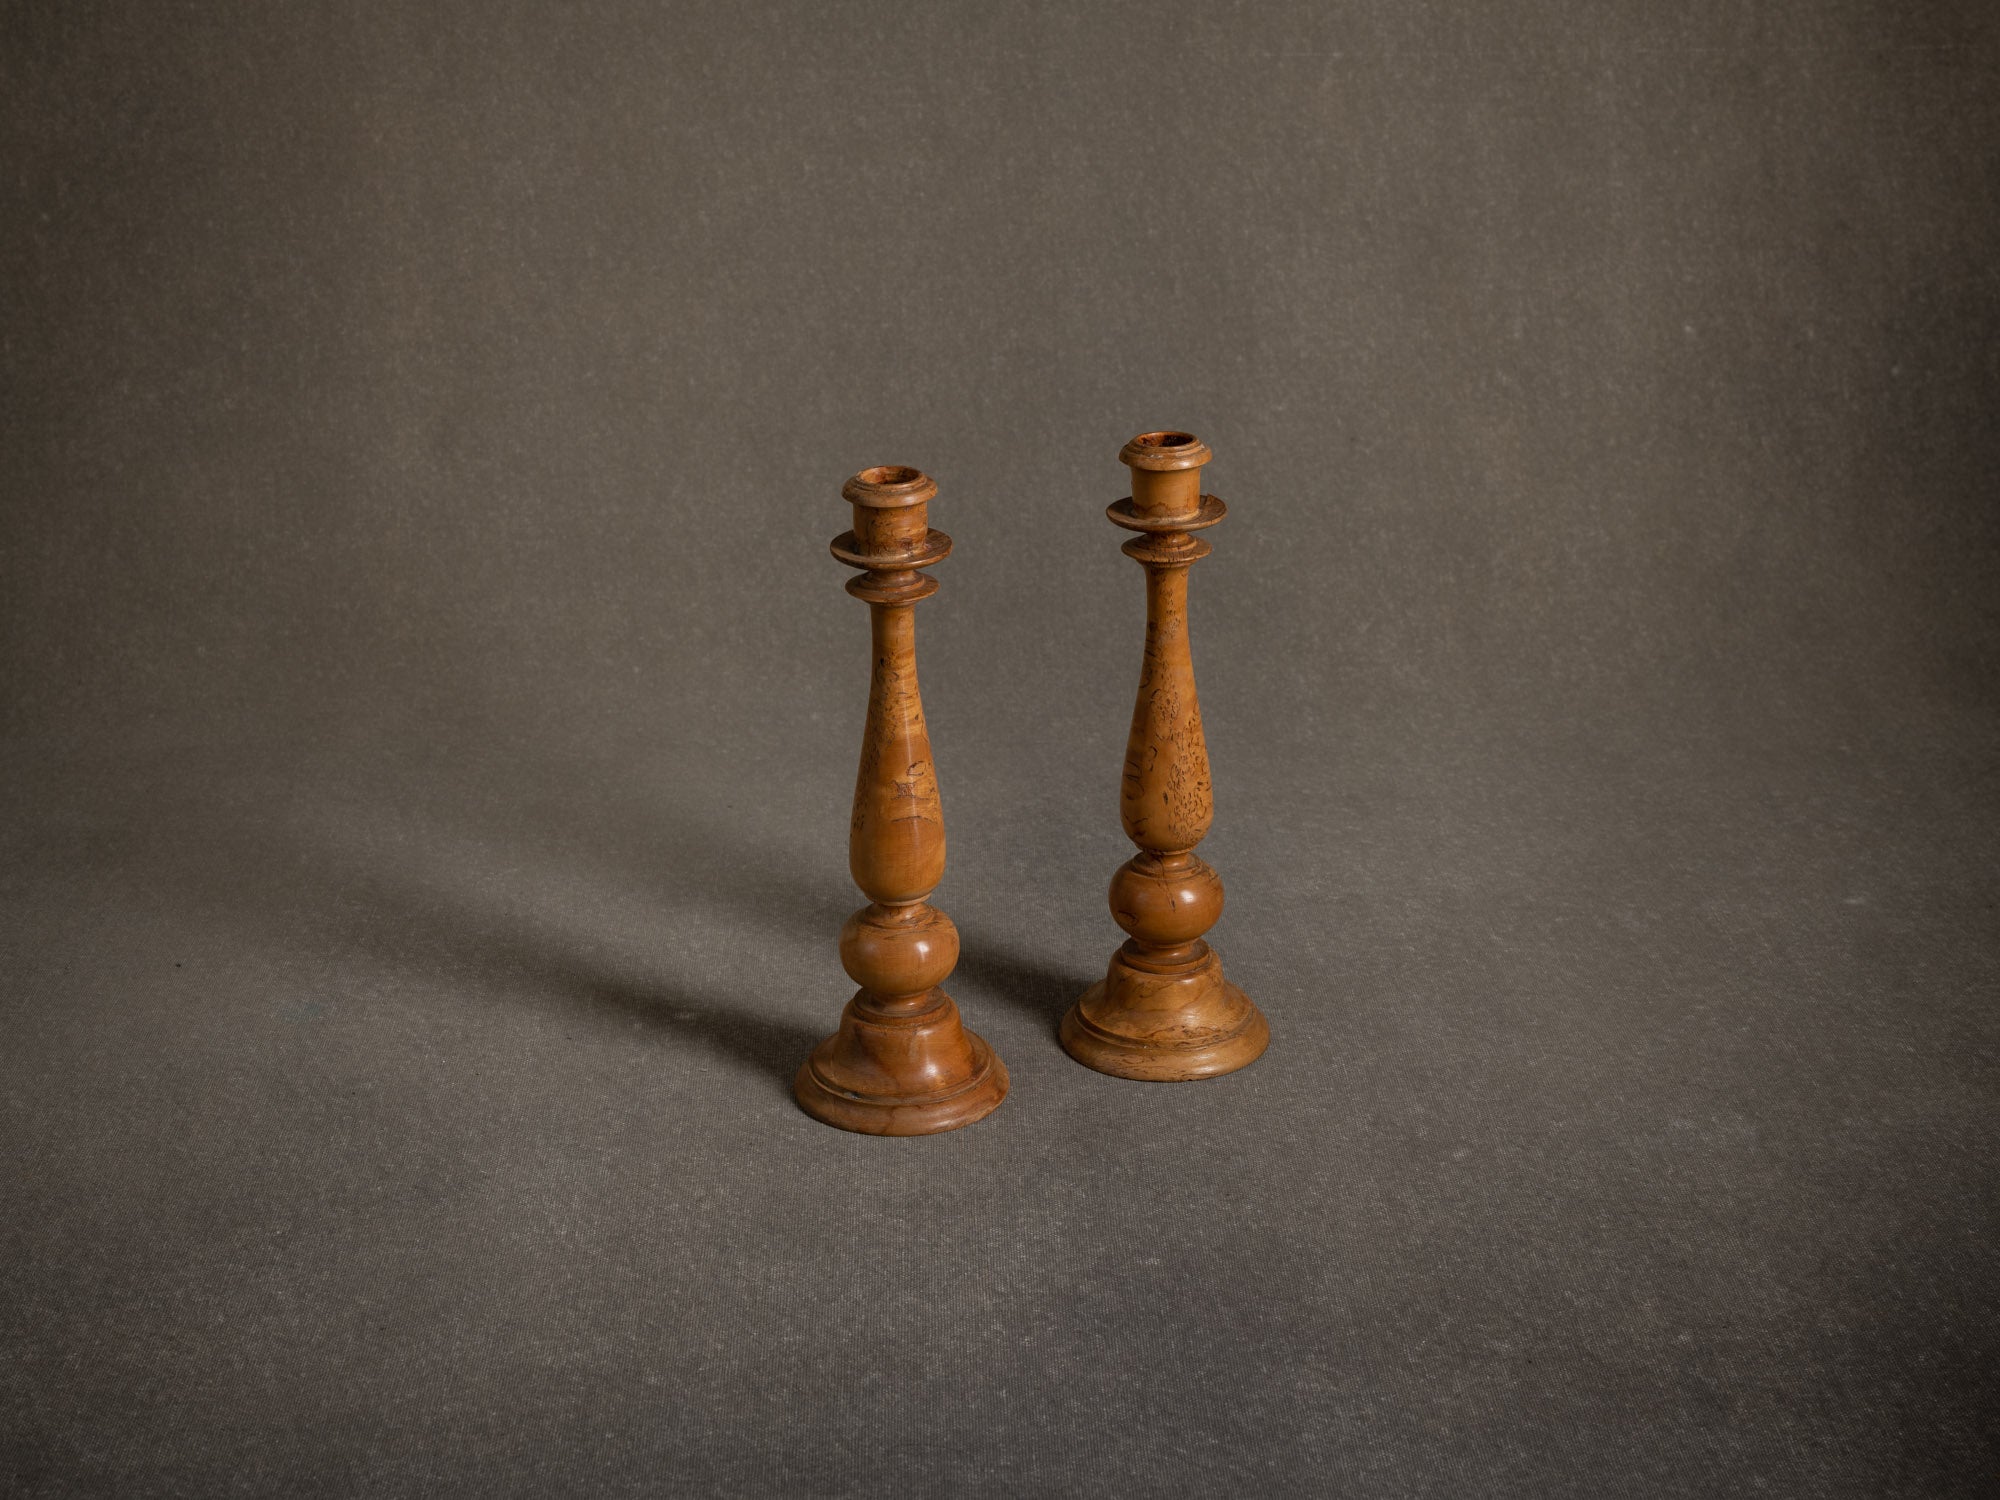 Paire de bougeoirs / flambeaux gustavien en bouleau tourné, Suède (vers 1850-1900)..Pair of gustavian candle holders in turned solid birch, Sweden (circa 1850-1900)